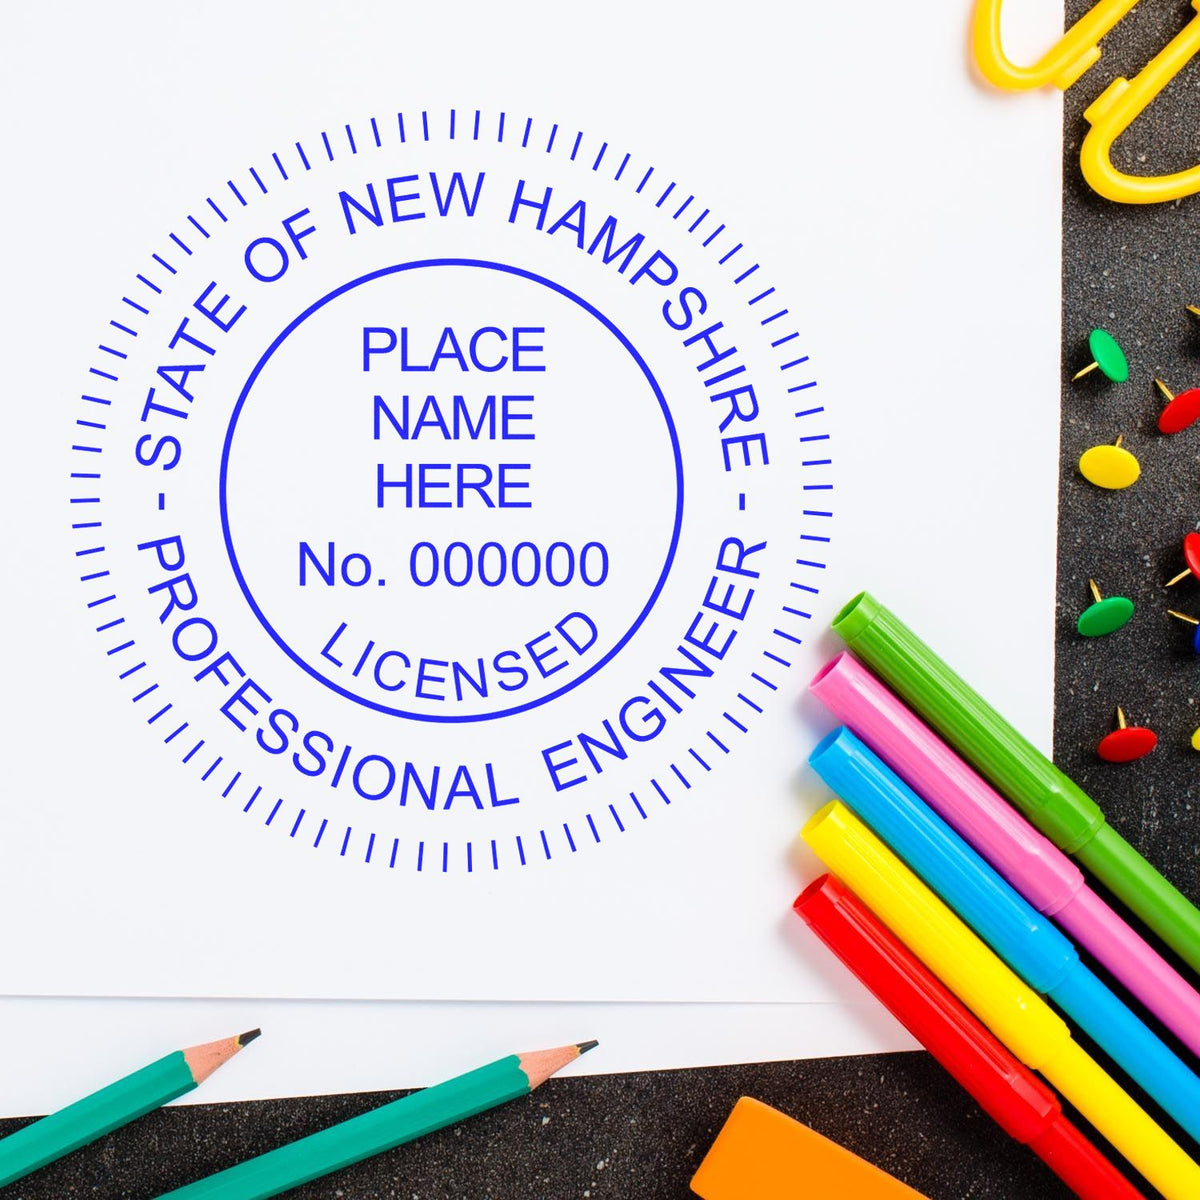 The Slim Pre-Inked New Hampshire Professional Engineer Seal Stamp stamp impression comes to life with a crisp, detailed photo on paper - showcasing true professional quality.